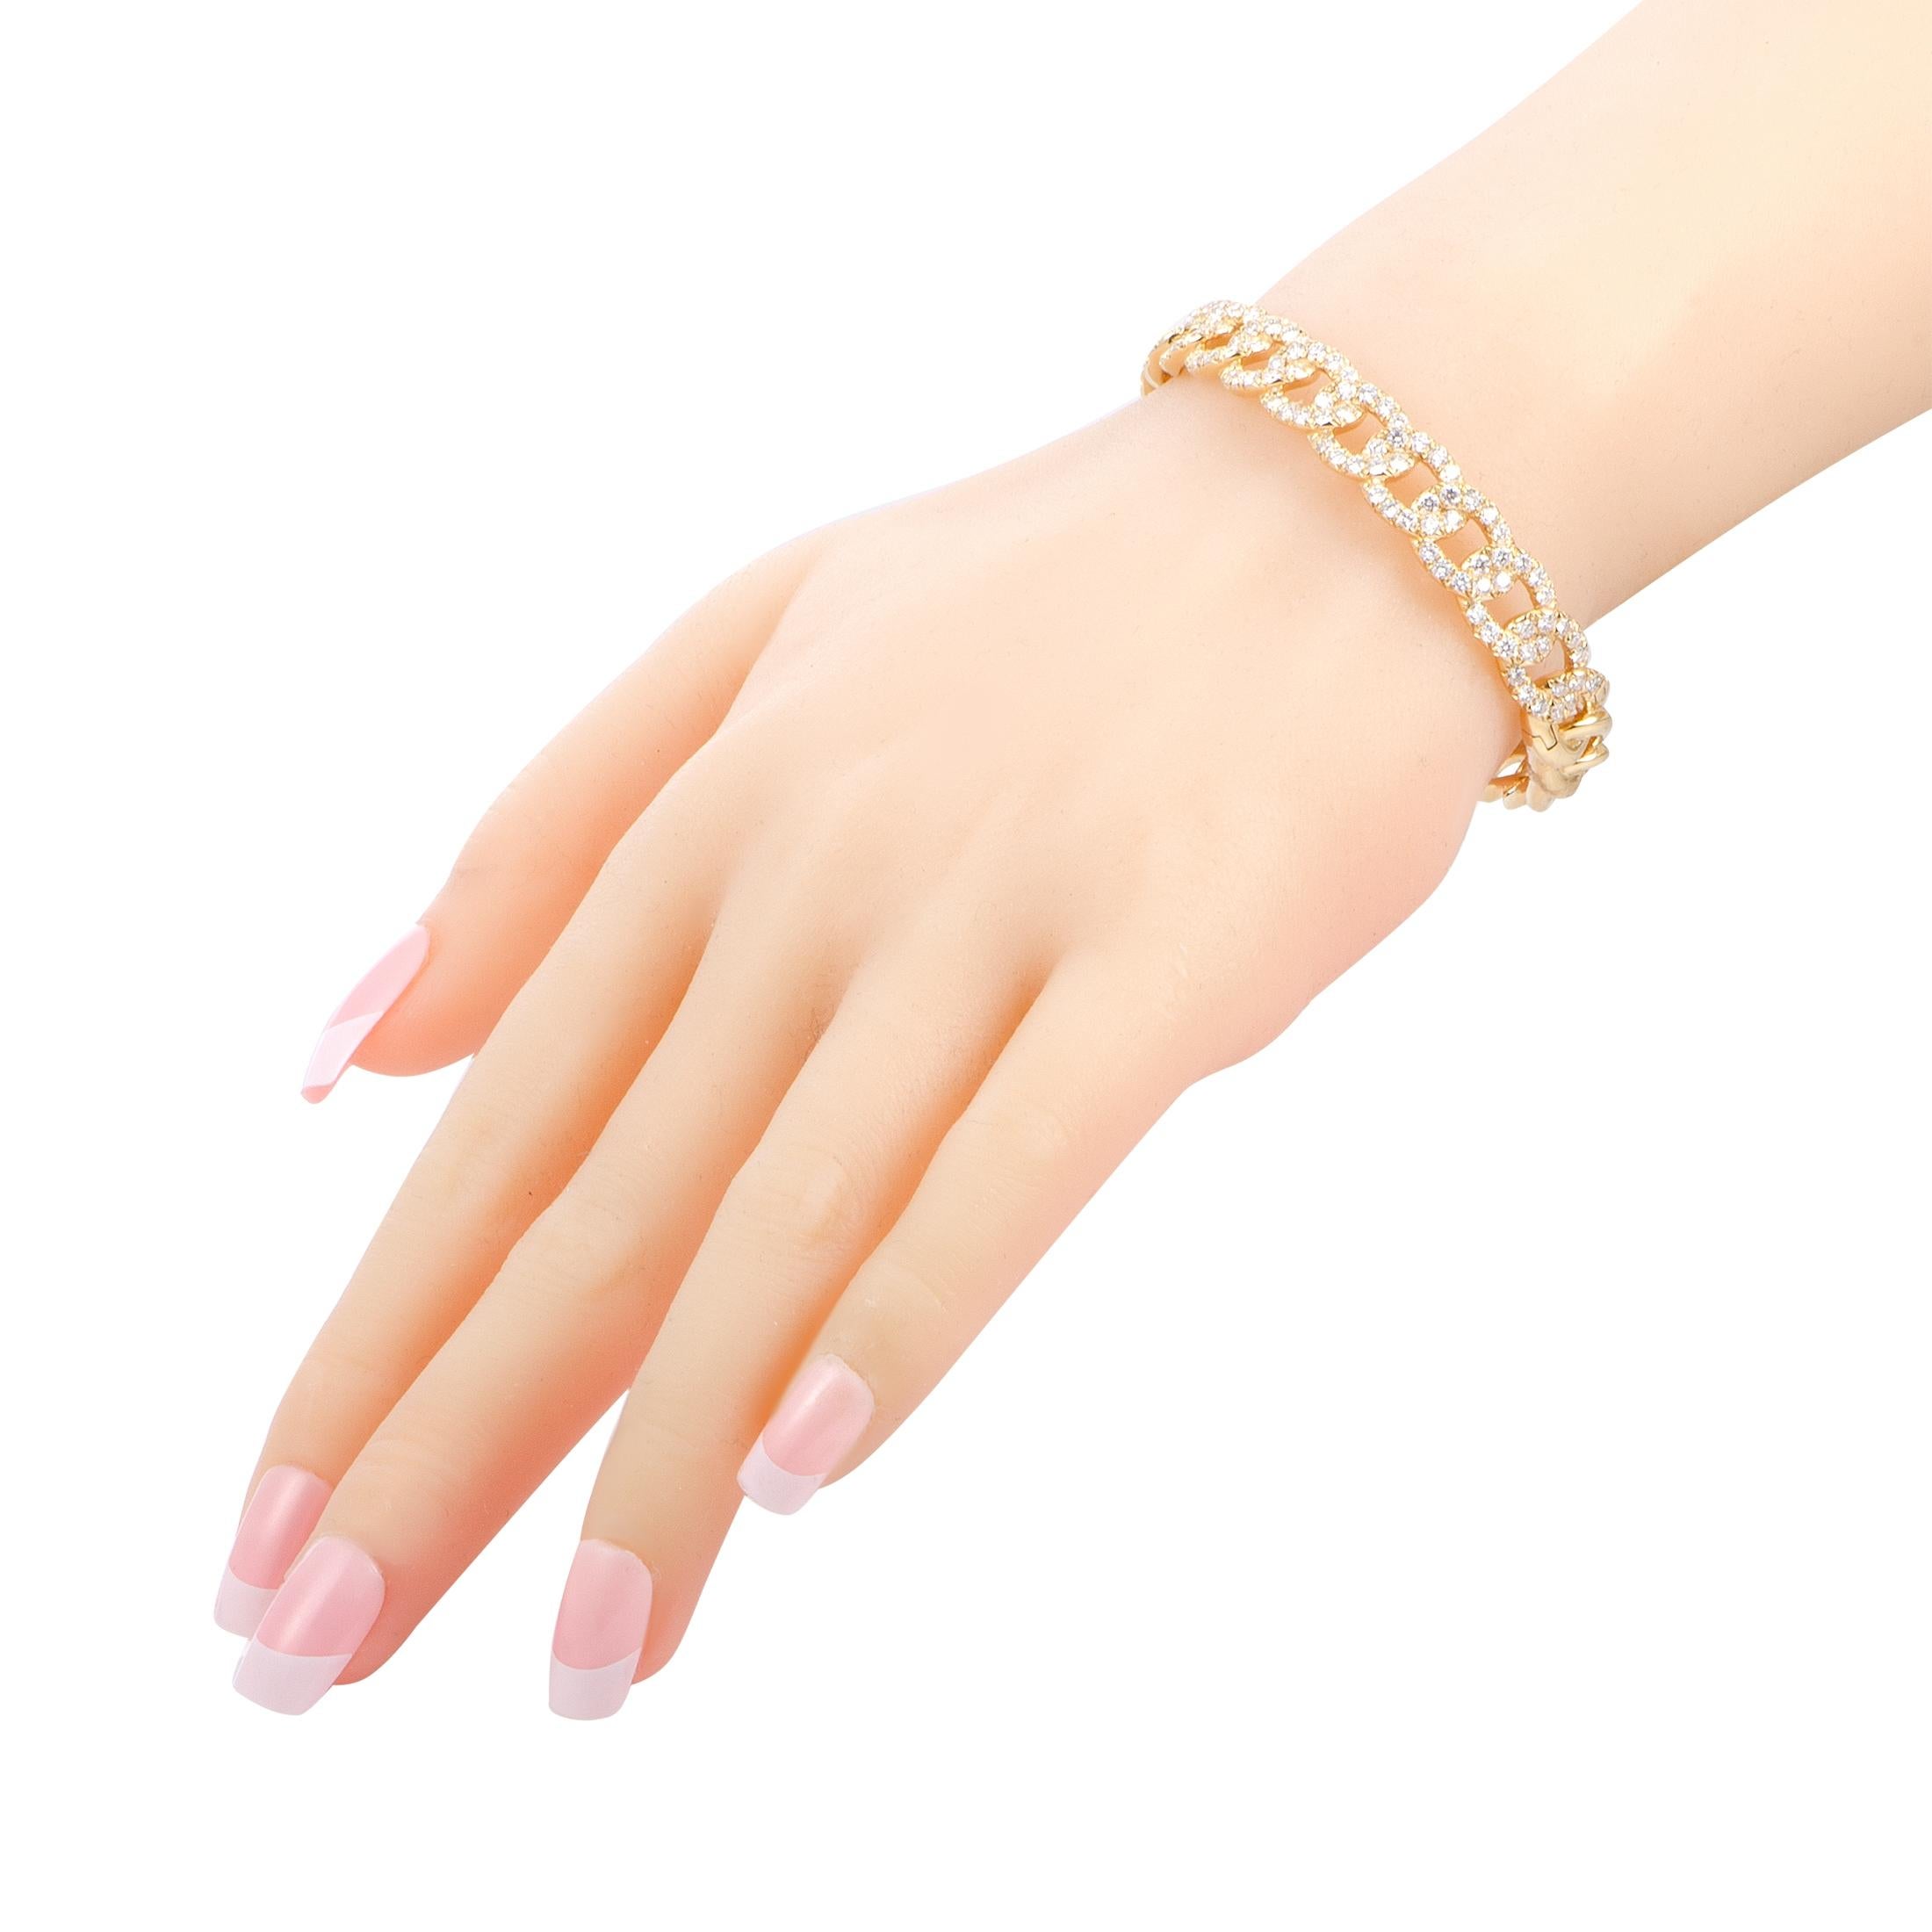 Featuring a stunningly graceful design presented in luxurious gold, this splendid bracelet exudes classy elegance and prestigious extravagance. Presented by , the bracelet is beautifully crafted from radiant 18K yellow gold. The sumptuous sheen of